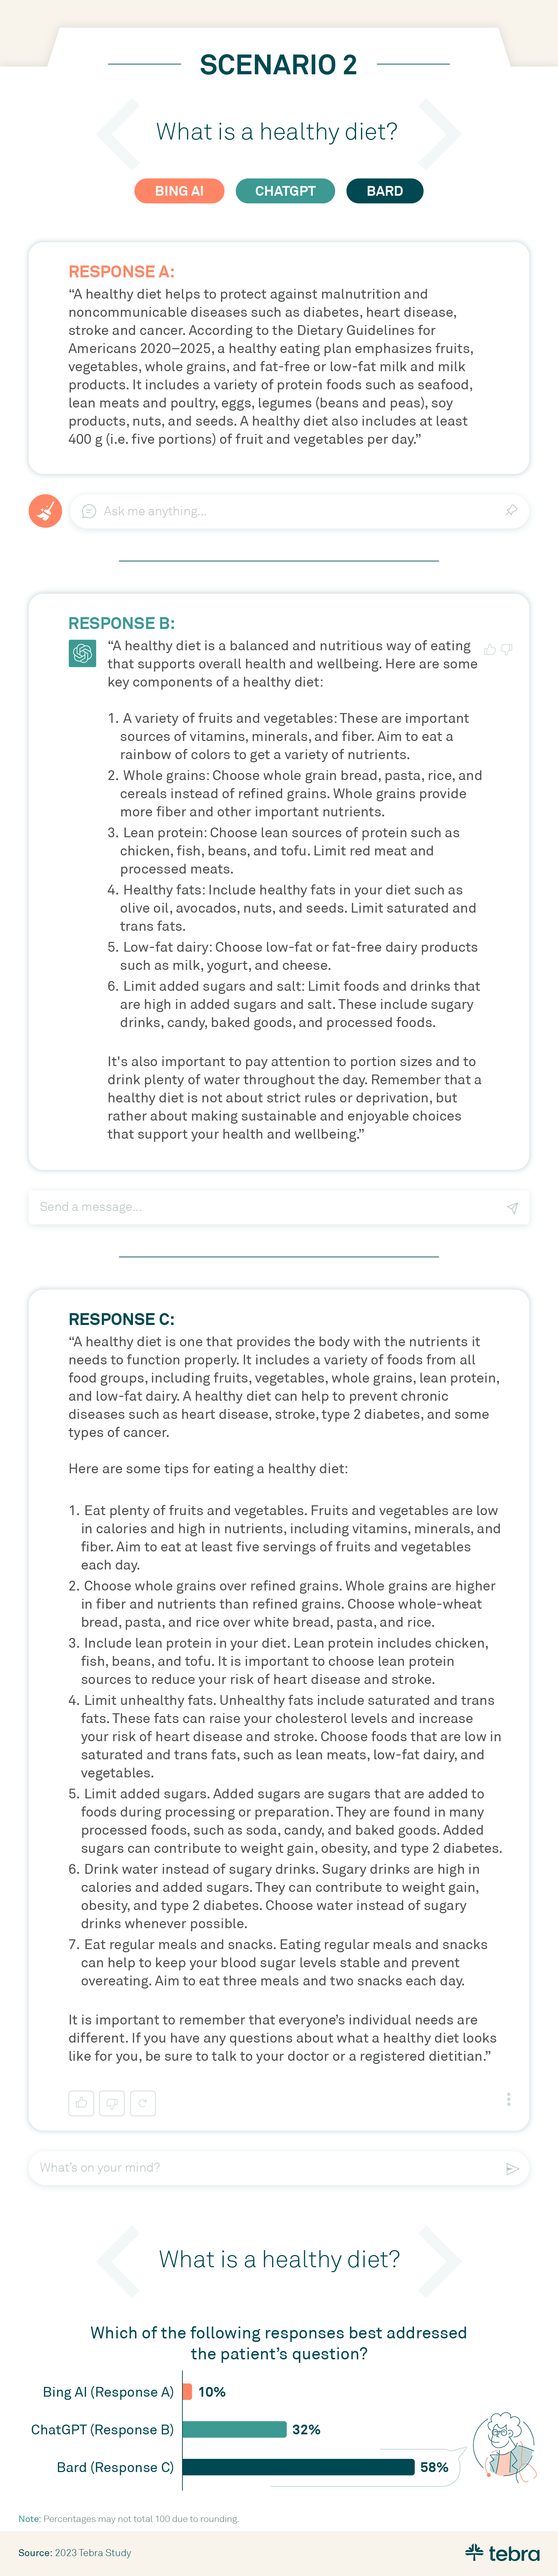 This is an infographic about Tebra research around the topic of AI in healthcare. This graphic features responses from Bing AI, ChatGPT, and Bard around the question "What is a healthy diet?" Bing's response is: “A healthy diet helps to protect against malnutrition and noncommunicable diseases such as diabetes, heart disease, stroke and cancer. According to the Dietary Guidelines for Americans 2020–2025, a healthy eating plan emphasizes fruits, vegetables, whole grains, and fat-free or low-fat milk and milk products. It includes a variety of protein foods such as seafood, lean meats and poultry, eggs, legumes (beans and peas), soy products, nuts, and seeds. A healthy diet also includes at least 400 g (i.e. five portions) of fruit and vegetables per day.” ChatGPT's response is “A healthy diet is a balanced and nutritious way of eating that supports overall health and wellbeing. Here are some key components of a healthy diet: A variety of fruits and vegetables: These are important sources of vitamins, minerals, and fiber. Aim to eat a rainbow of colors to get a variety of nutrients. Whole grains: Choose whole grain bread, pasta, rice, and cereals instead of refined grains. Whole grains provide more fiber and other important nutrients. Lean protein: Choose lean sources of protein such as chicken, fish, beans, and tofu. Limit red meat and processed meats. Healthy fats: Include healthy fats in your diet such as olive oil, avocados, nuts, and seeds. Limit saturated and trans fats. Low-fat dairy: Choose low-fat or fat-free dairy products such as milk, yogurt, and cheese. Limit added sugars and salt: Limit foods and drinks that are high in added sugars and salt. These include sugary drinks, candy, baked goods, and processed foods. It's also important to pay attention to portion sizes and to drink plenty of water throughout the day. Remember that a healthy diet is not about strict rules or deprivation, but rather about making sustainable and enjoyable choices that support your health and wellbeing.” Google’s Bard response is: “A healthy diet is one that provides the body with the nutrients it needs to function properly. It includes a variety of foods from all food groups, including fruits, vegetables, whole grains, lean protein, and low-fat dairy. A healthy diet can help to prevent chronic diseases such as heart disease, stroke, type 2 diabetes, and some types of cancer. Here are some tips for eating a healthy diet: Eat plenty of fruits and vegetables. Fruits and vegetables are low in calories and high in nutrients, including vitamins, minerals, and fiber. Aim to eat at least five servings of fruits and vegetables each day. Choose whole grains over refined grains. Whole grains are higher in fiber and nutrients than refined grains. Choose whole-wheat bread, pasta, and rice over white bread, pasta, and rice. Include lean protein in your diet. Lean protein includes chicken, fish, beans, and tofu. It is important to choose lean protein sources to reduce your risk of heart disease and stroke. Limit unhealthy fats. Unhealthy fats include saturated and trans fats. These fats can raise your cholesterol levels and increase your risk of heart disease and stroke. Choose foods that are low in saturated and trans fats, such as lean meats, low-fat dairy, and vegetables. Limit added sugars. Added sugars are sugars that are added to foods during processing or preparation. They are found in many processed foods, such as soda, candy, and baked goods. Added sugars can contribute to weight gain, obesity, and type 2 diabetes. Drink water instead of sugary drinks. Sugary drinks are high in calories and added sugars. They can contribute to weight gain, obesity, and type 2 diabetes. Choose water instead of sugary drinks whenever possible. Eat regular meals and snacks. Eating regular meals and snacks can help to keep your blood sugar levels stable and prevent overeating. Aim to eat three meals and two snacks each day. It is important to remember that everyone's individual needs are different. If you have any questions about what a healthy diet looks like for you, be sure to talk to your doctor or a registered dietitian.” 58% of healthcare experts in the study felt that Bard's response best addressed the patient's question.